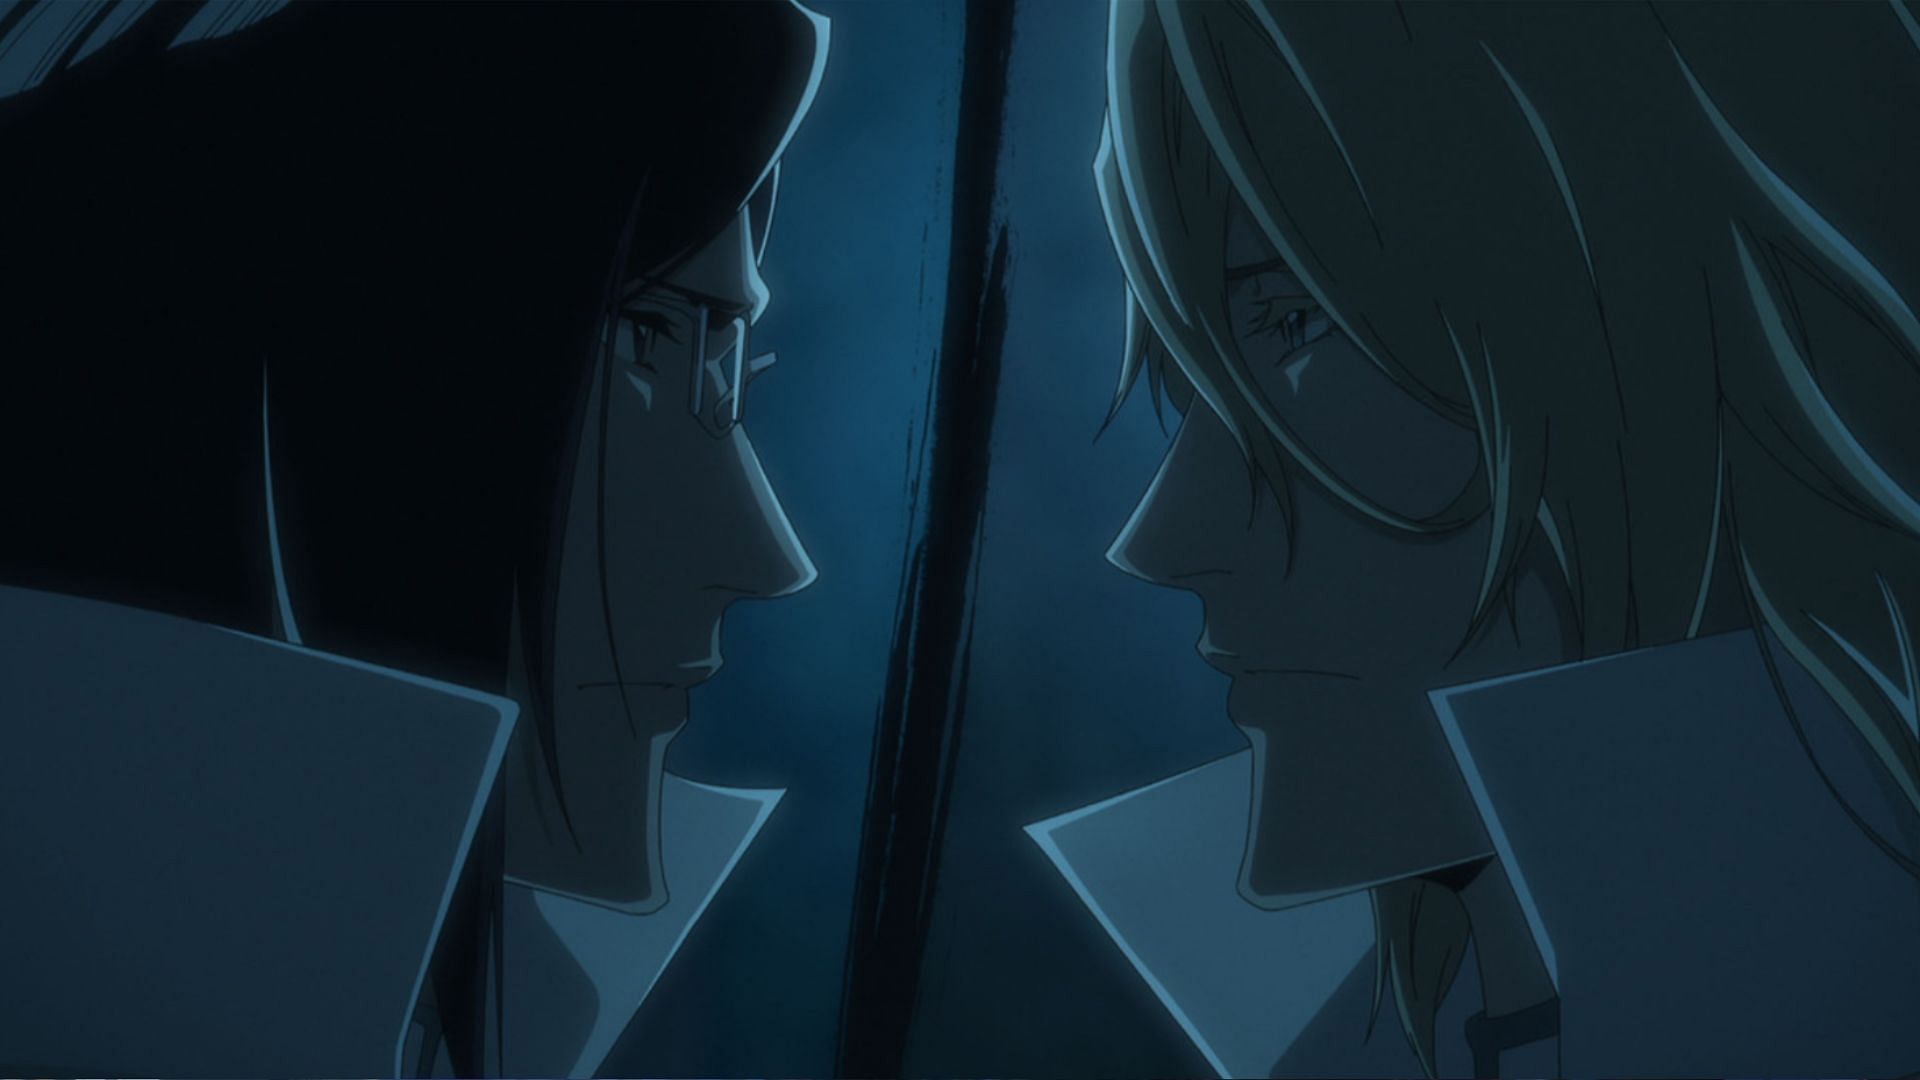 Bleach TYBW episode 19 preview hints at Ichigo returning to Soul